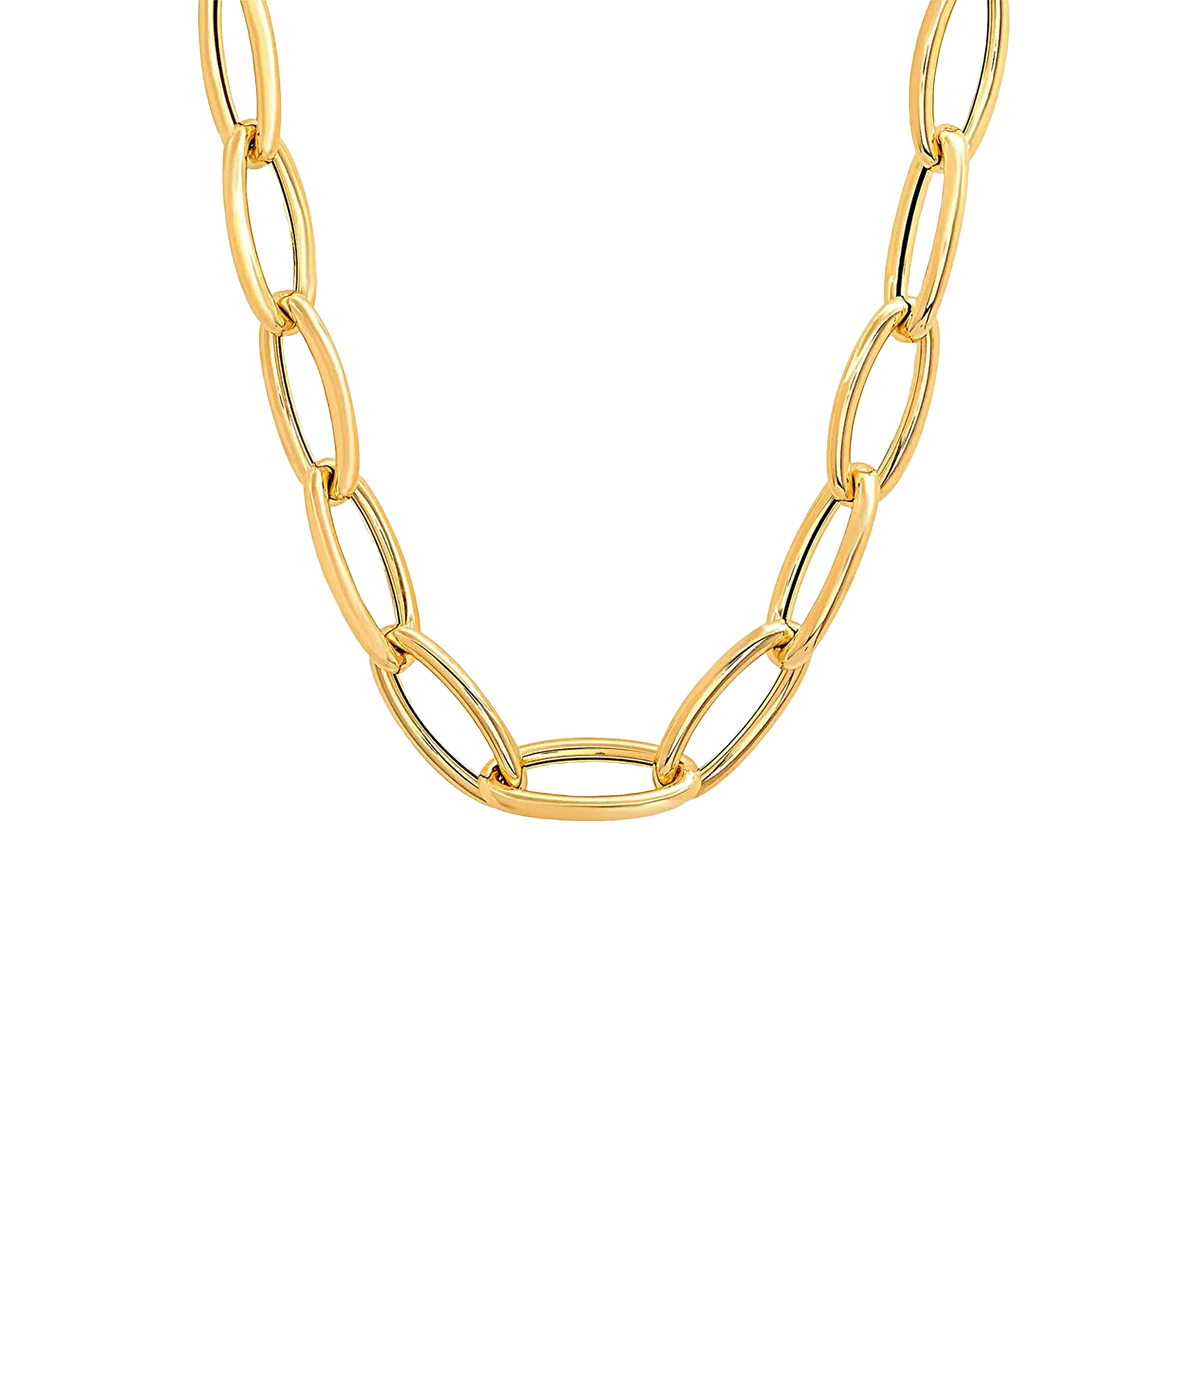 Jumbo Link Necklace in 14k Yellow Gold